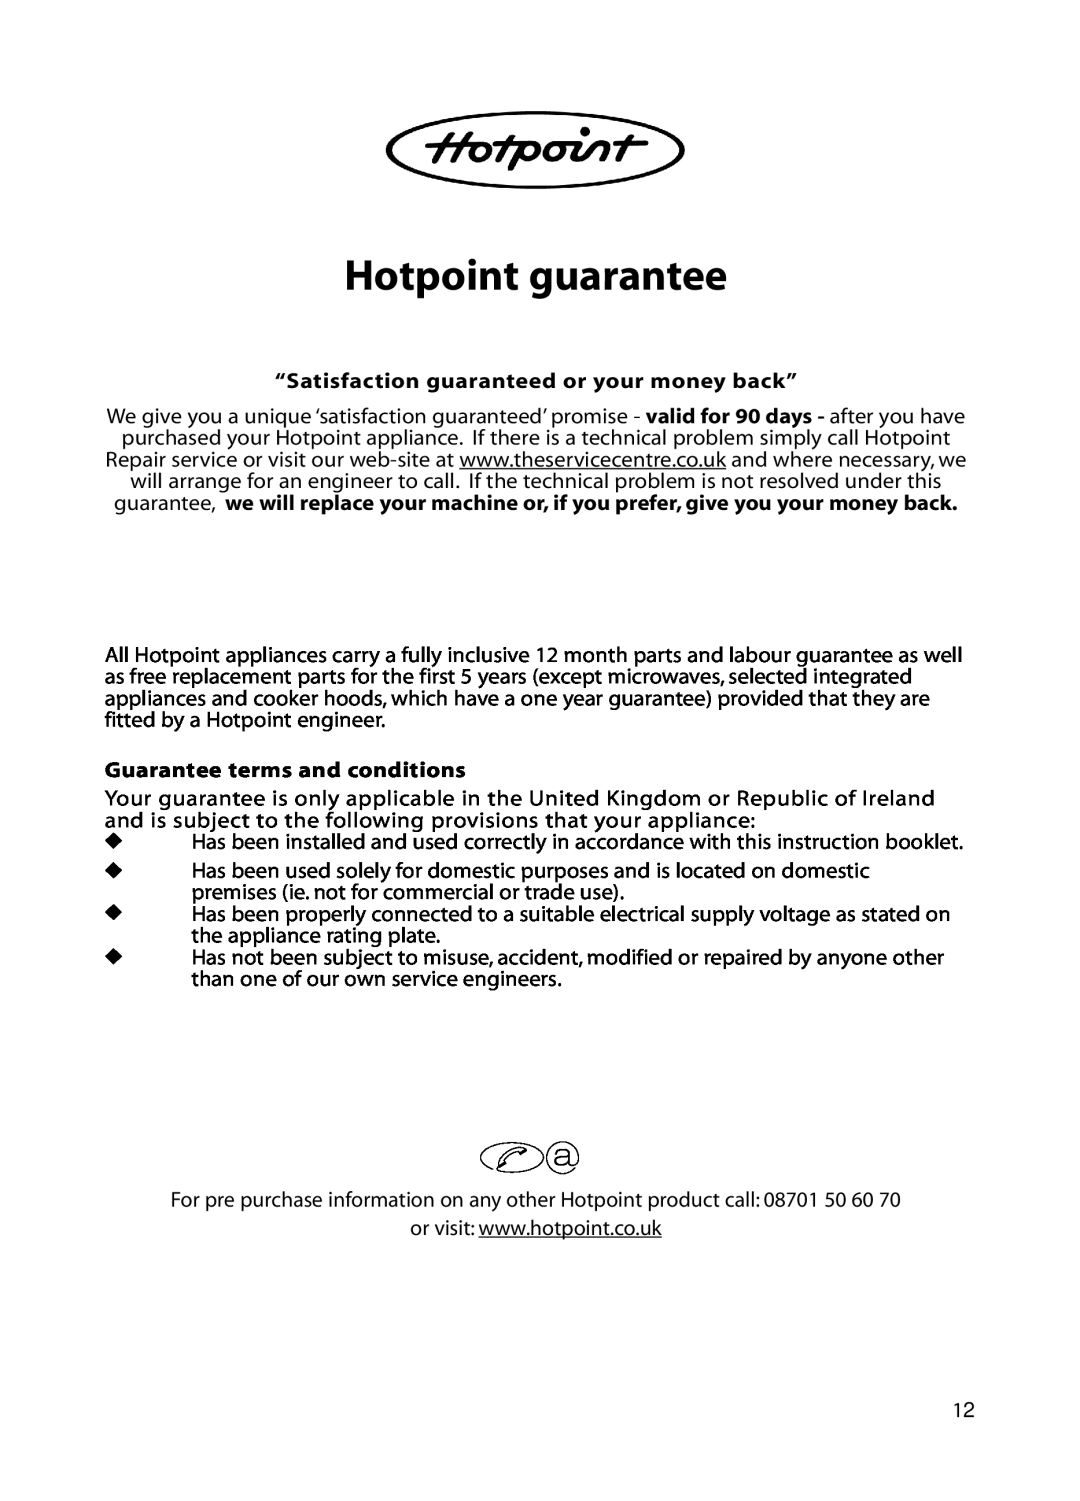 Hotpoint D C 27 manual Hotpoint guarantee, “Satisfaction guaranteed or your money back”, Guarantee terms and conditions 